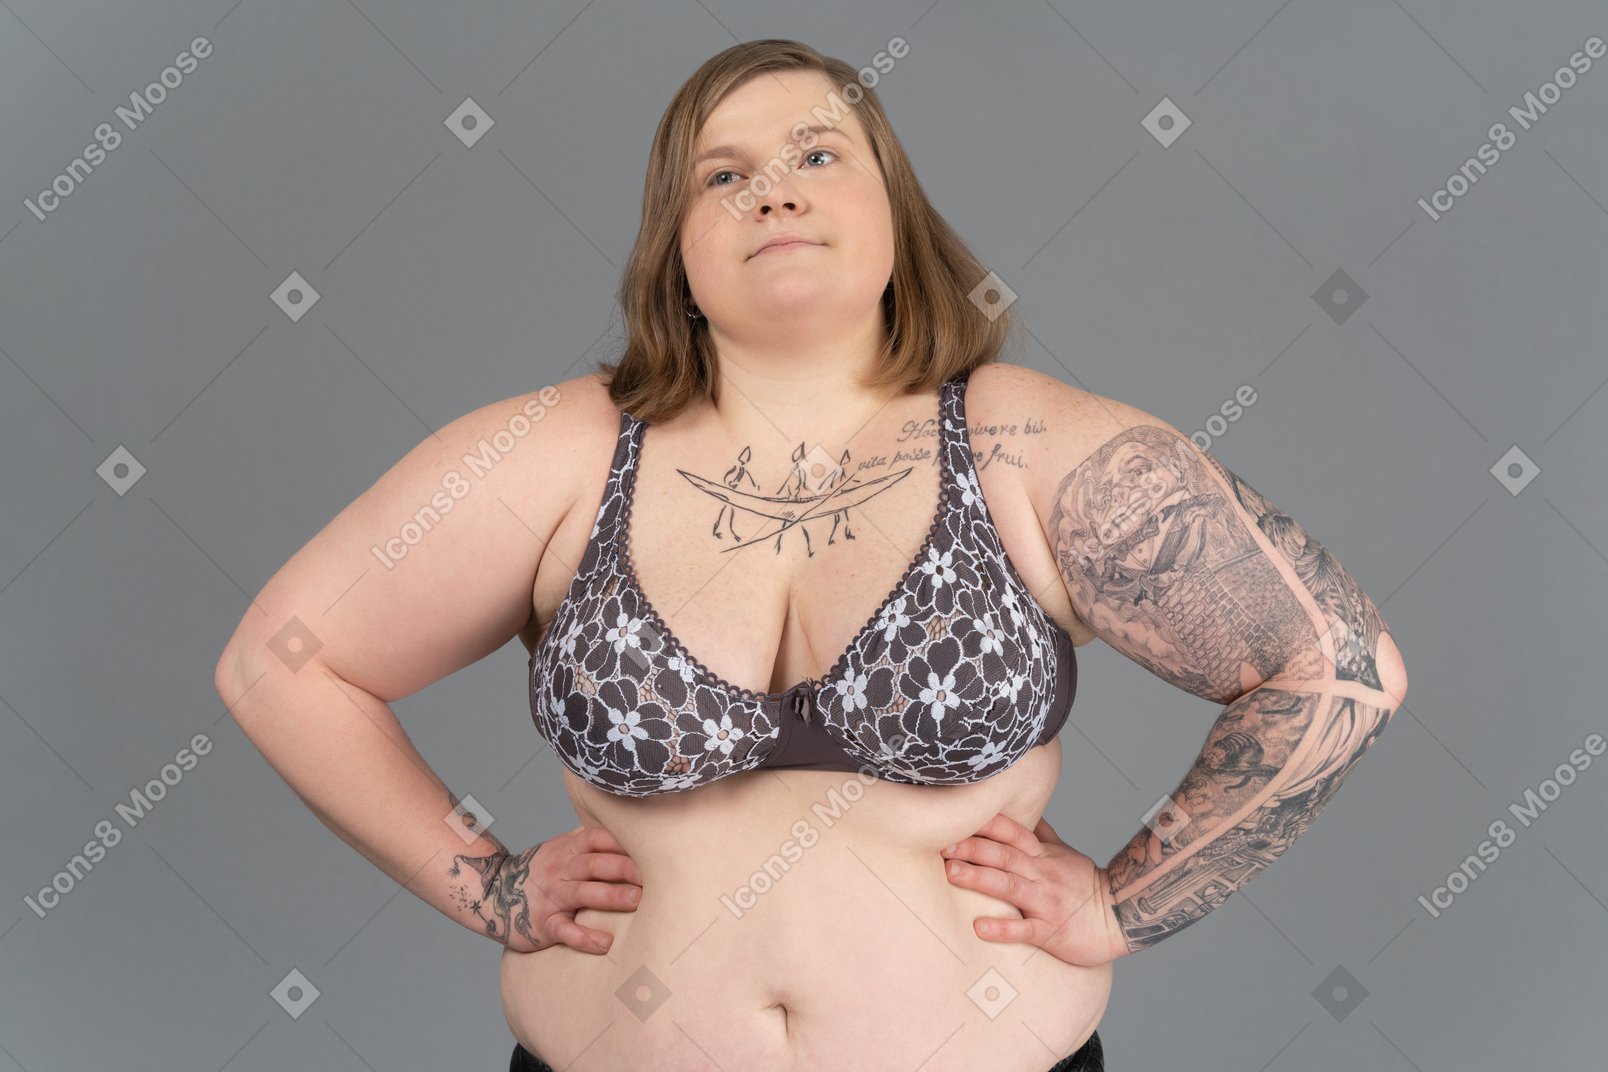 Plump woman standing with arms akimbo